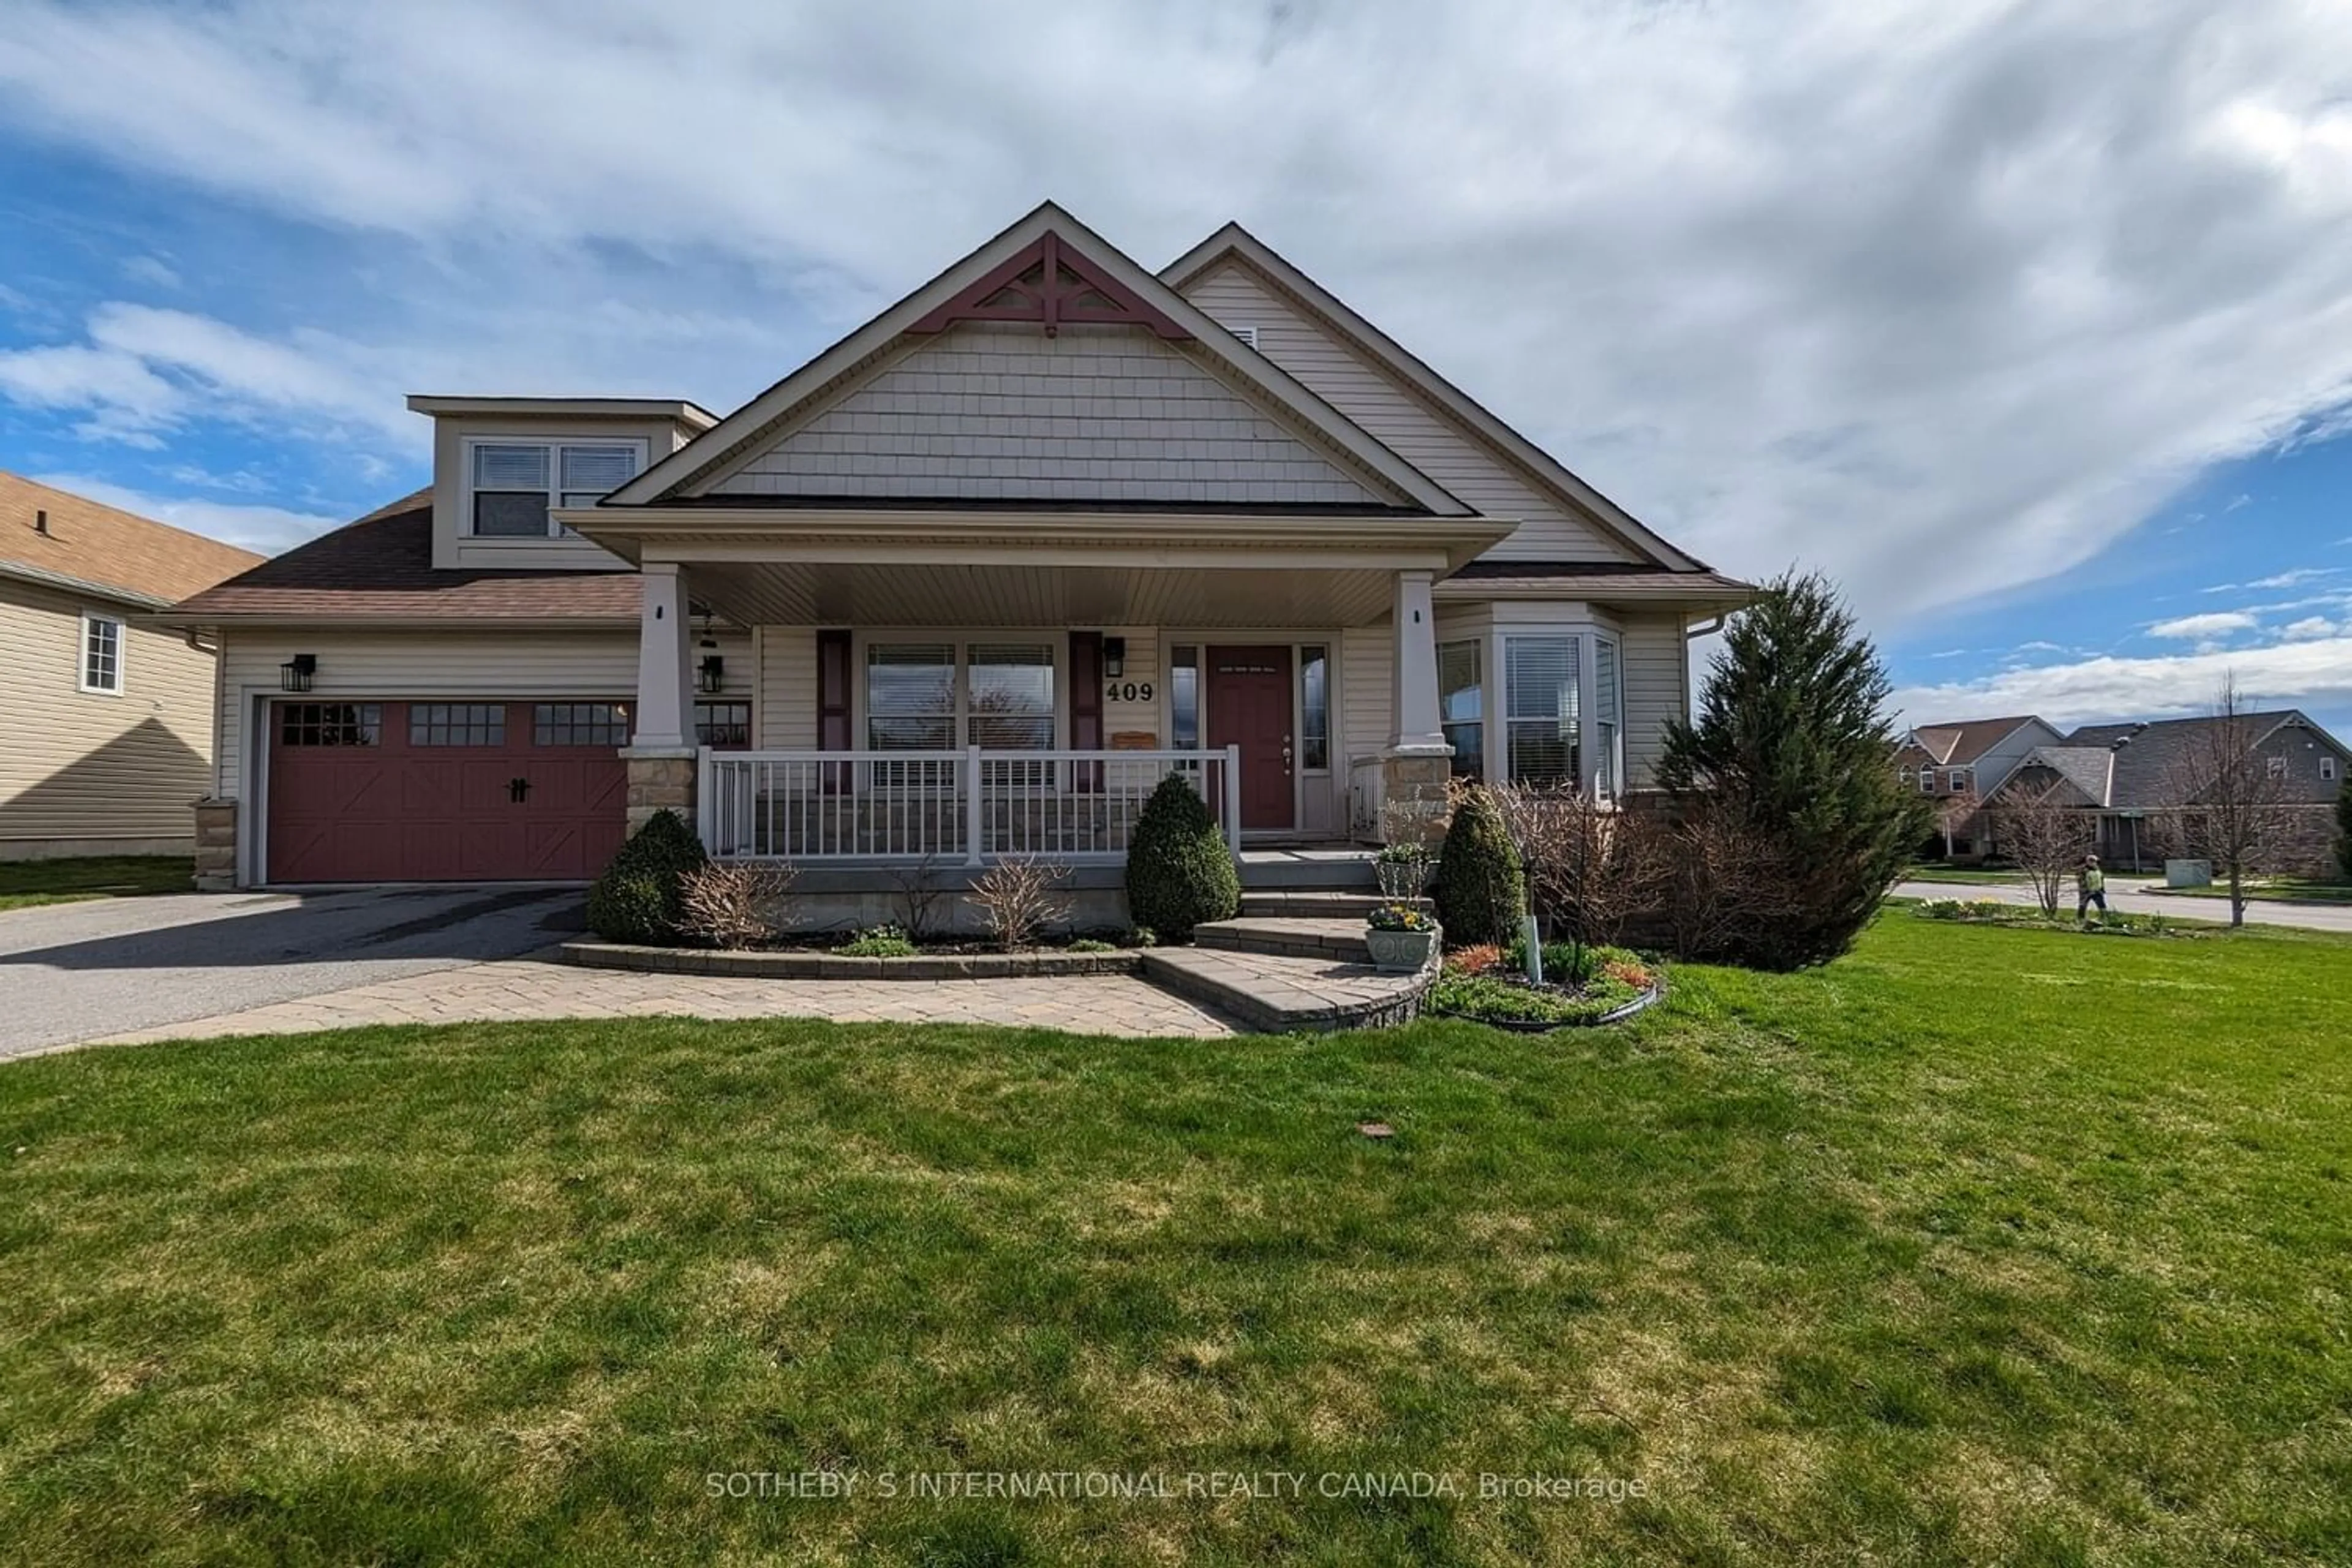 Frontside or backside of a home for 409 Lakeshore Rd, Port Hope Ontario L1A 3V7